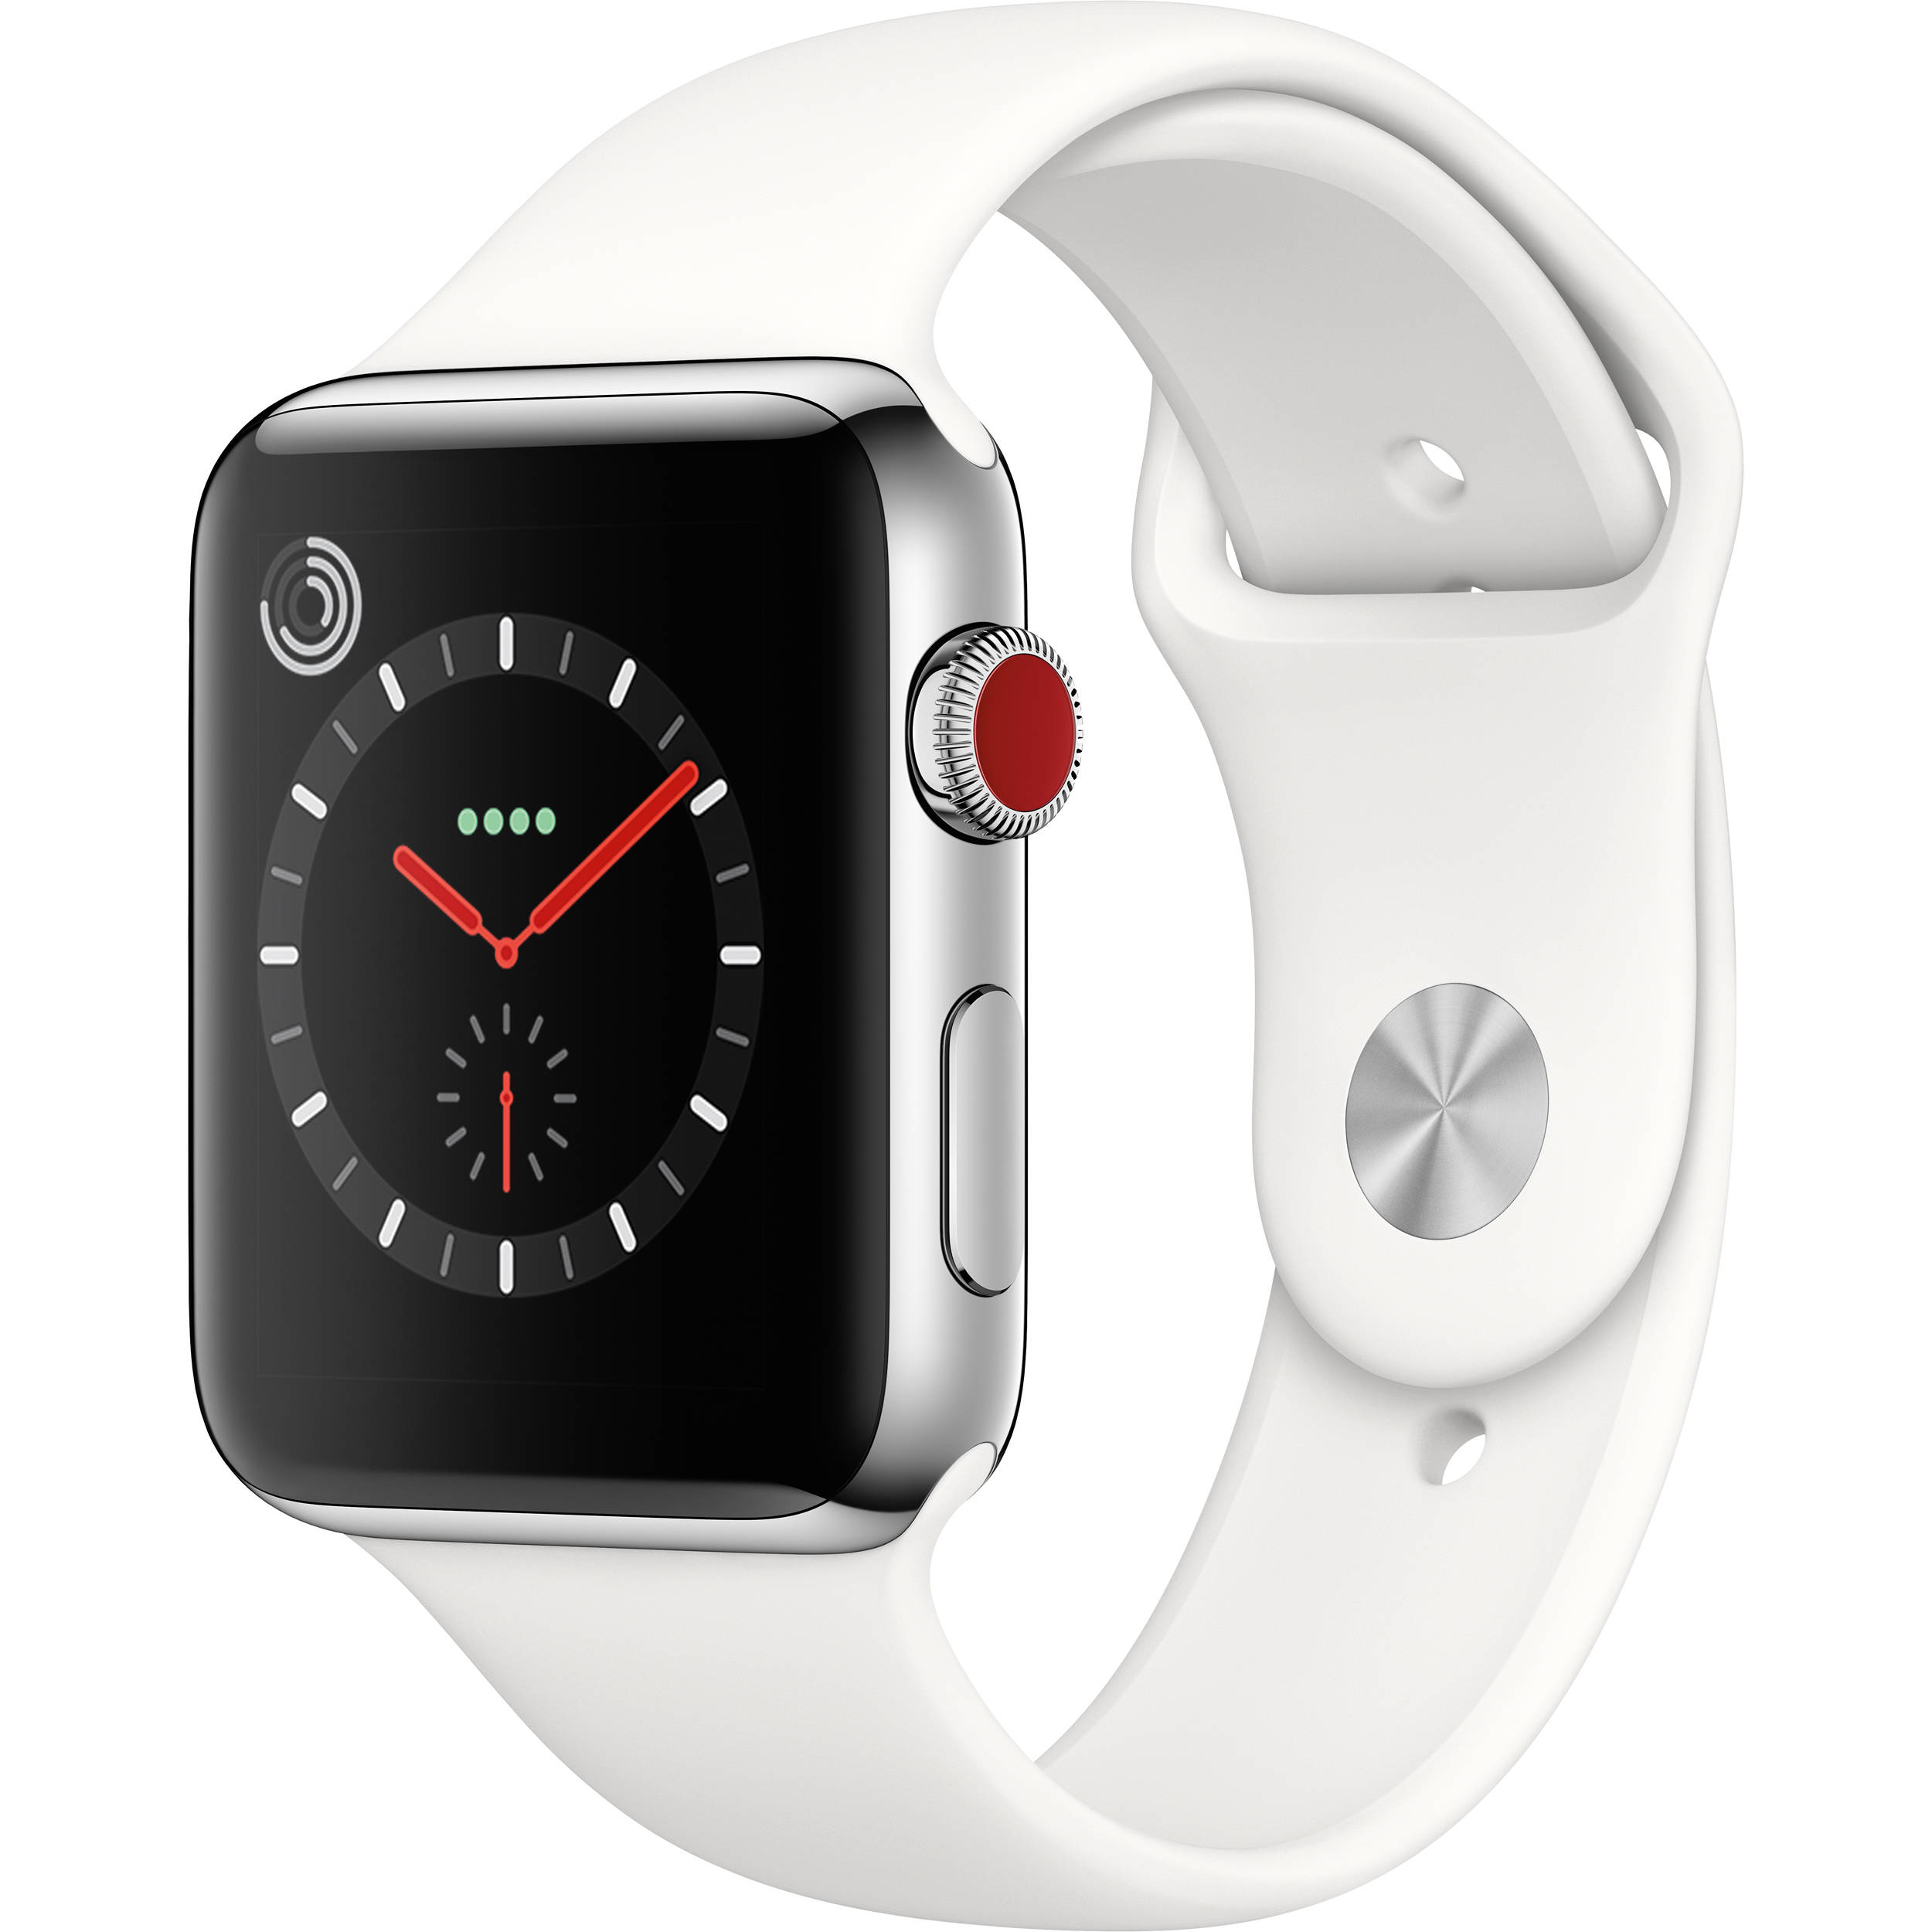 Used Apple Watch Series 3 With Cellular Clearance, 56% OFF | www 